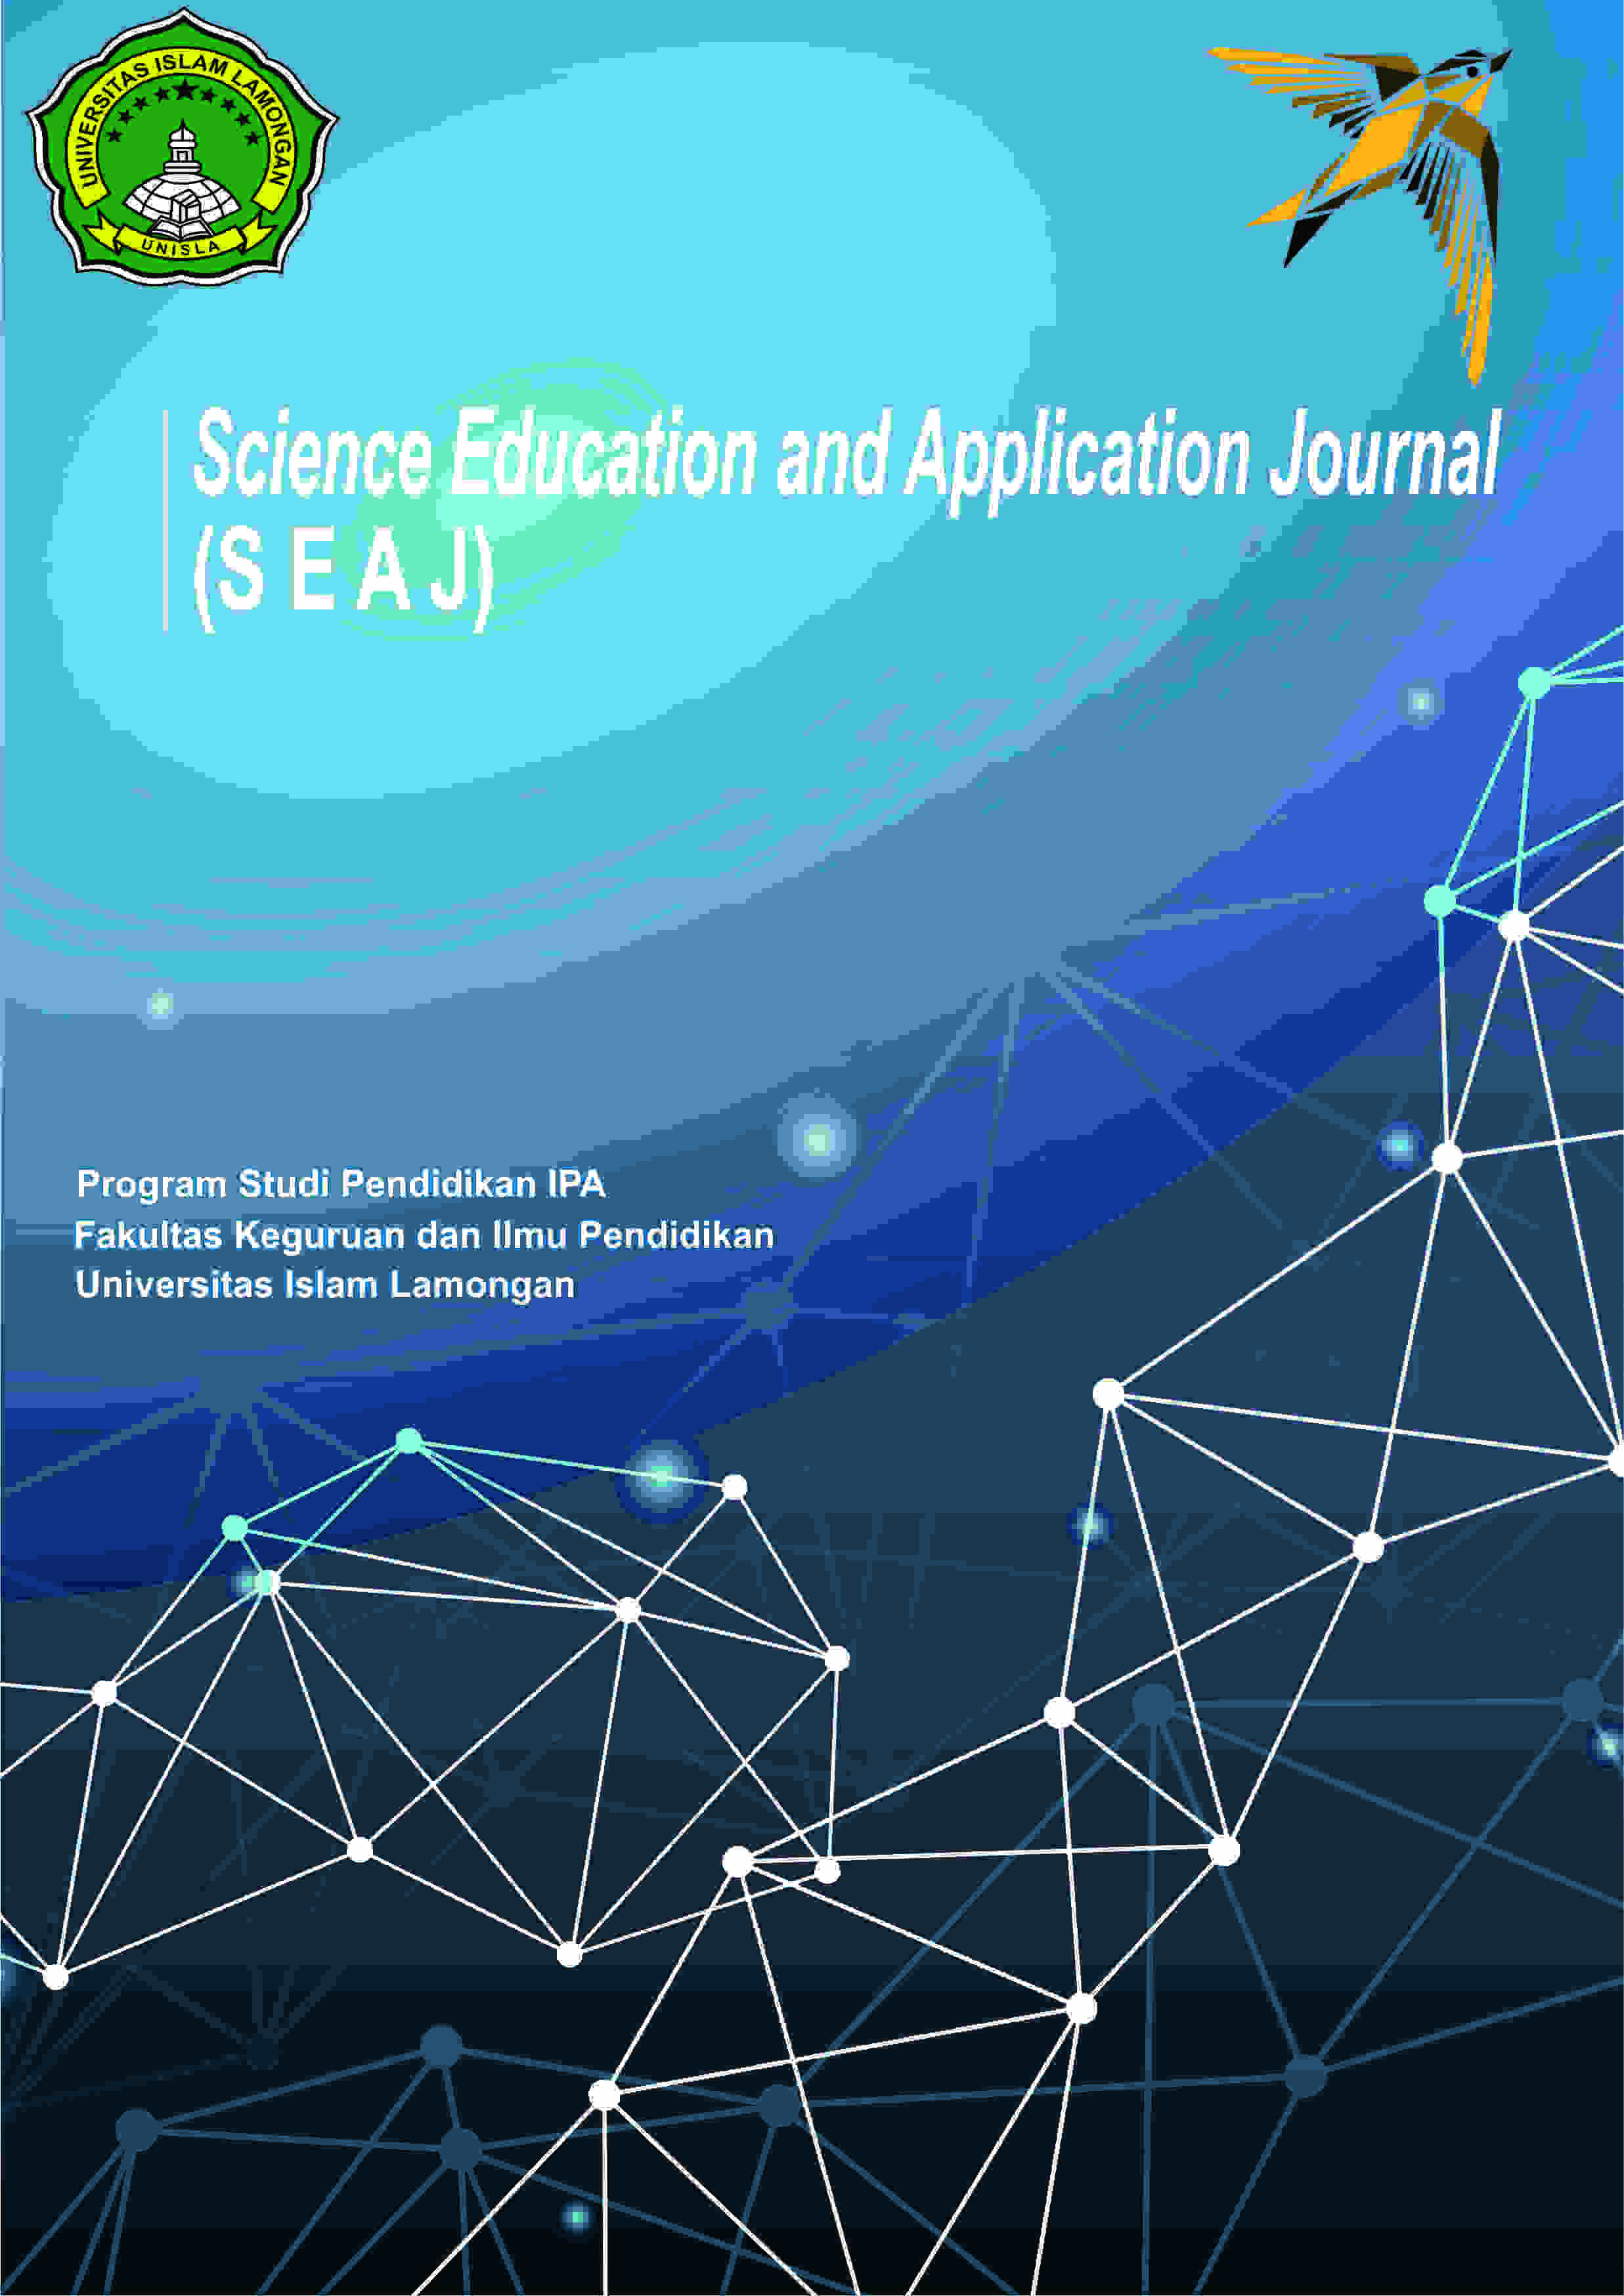 					View Vol. 1 No. 1 (2019): Science Education and Application Journal
				